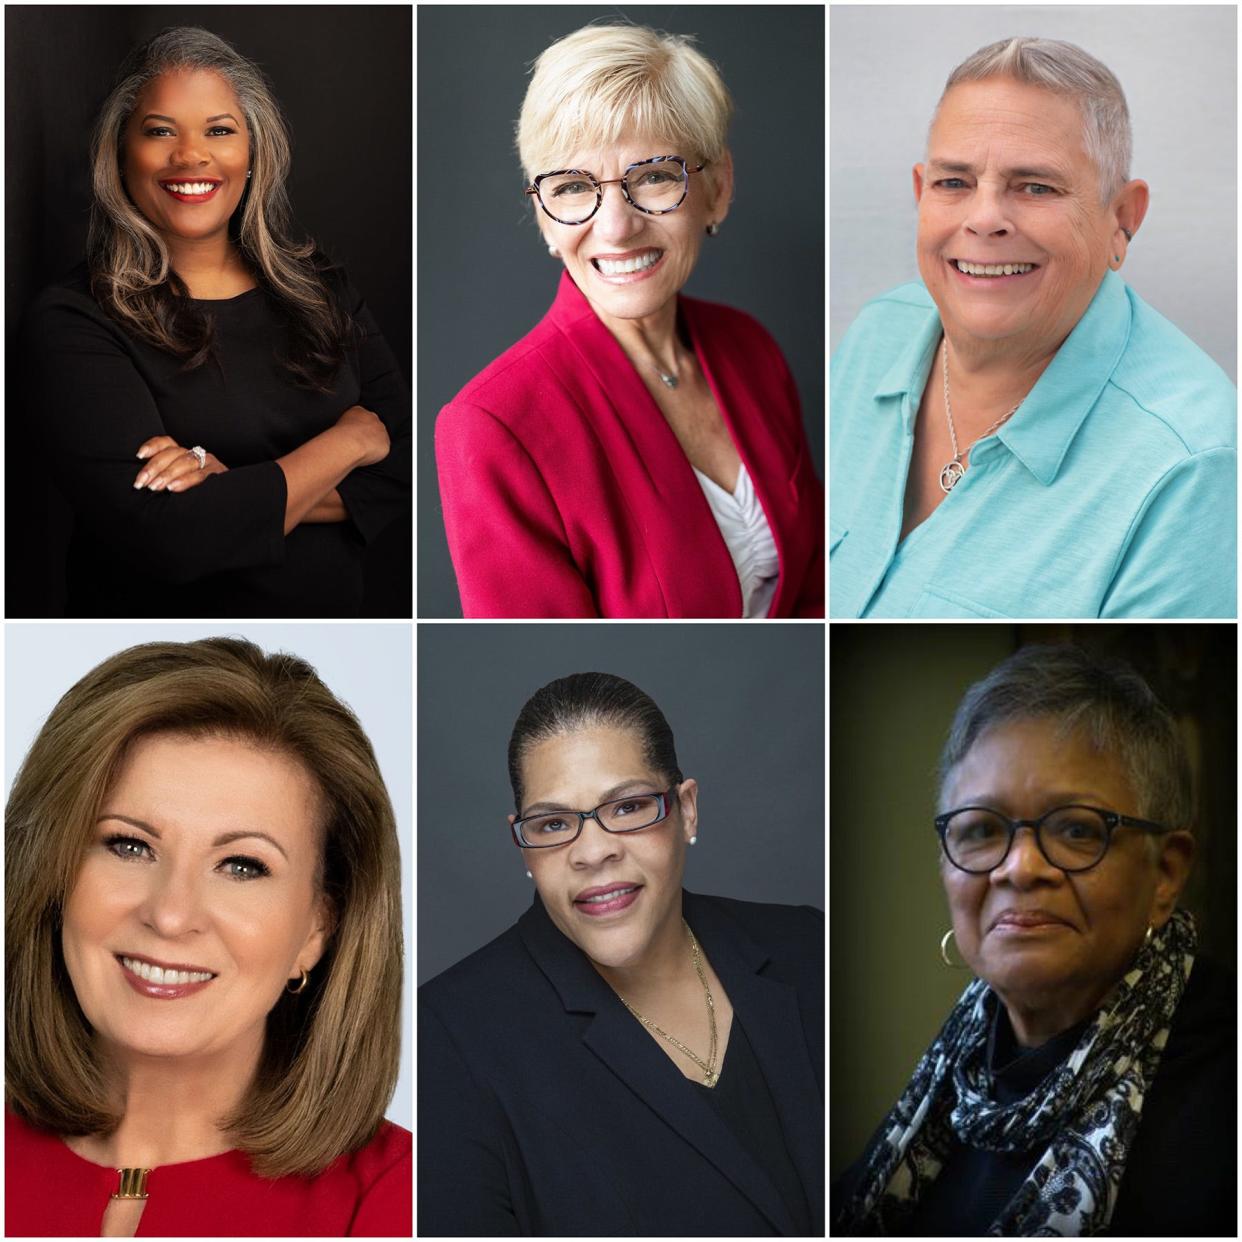 The YWCA Columbus 2023 Women of Achievement are, clockwise from top left, Judge Laurel Beatty Blunt, Marilyn Brown, Chris Cozad, Bettye Stull, Patrice Palmer and Colleen Marshall.